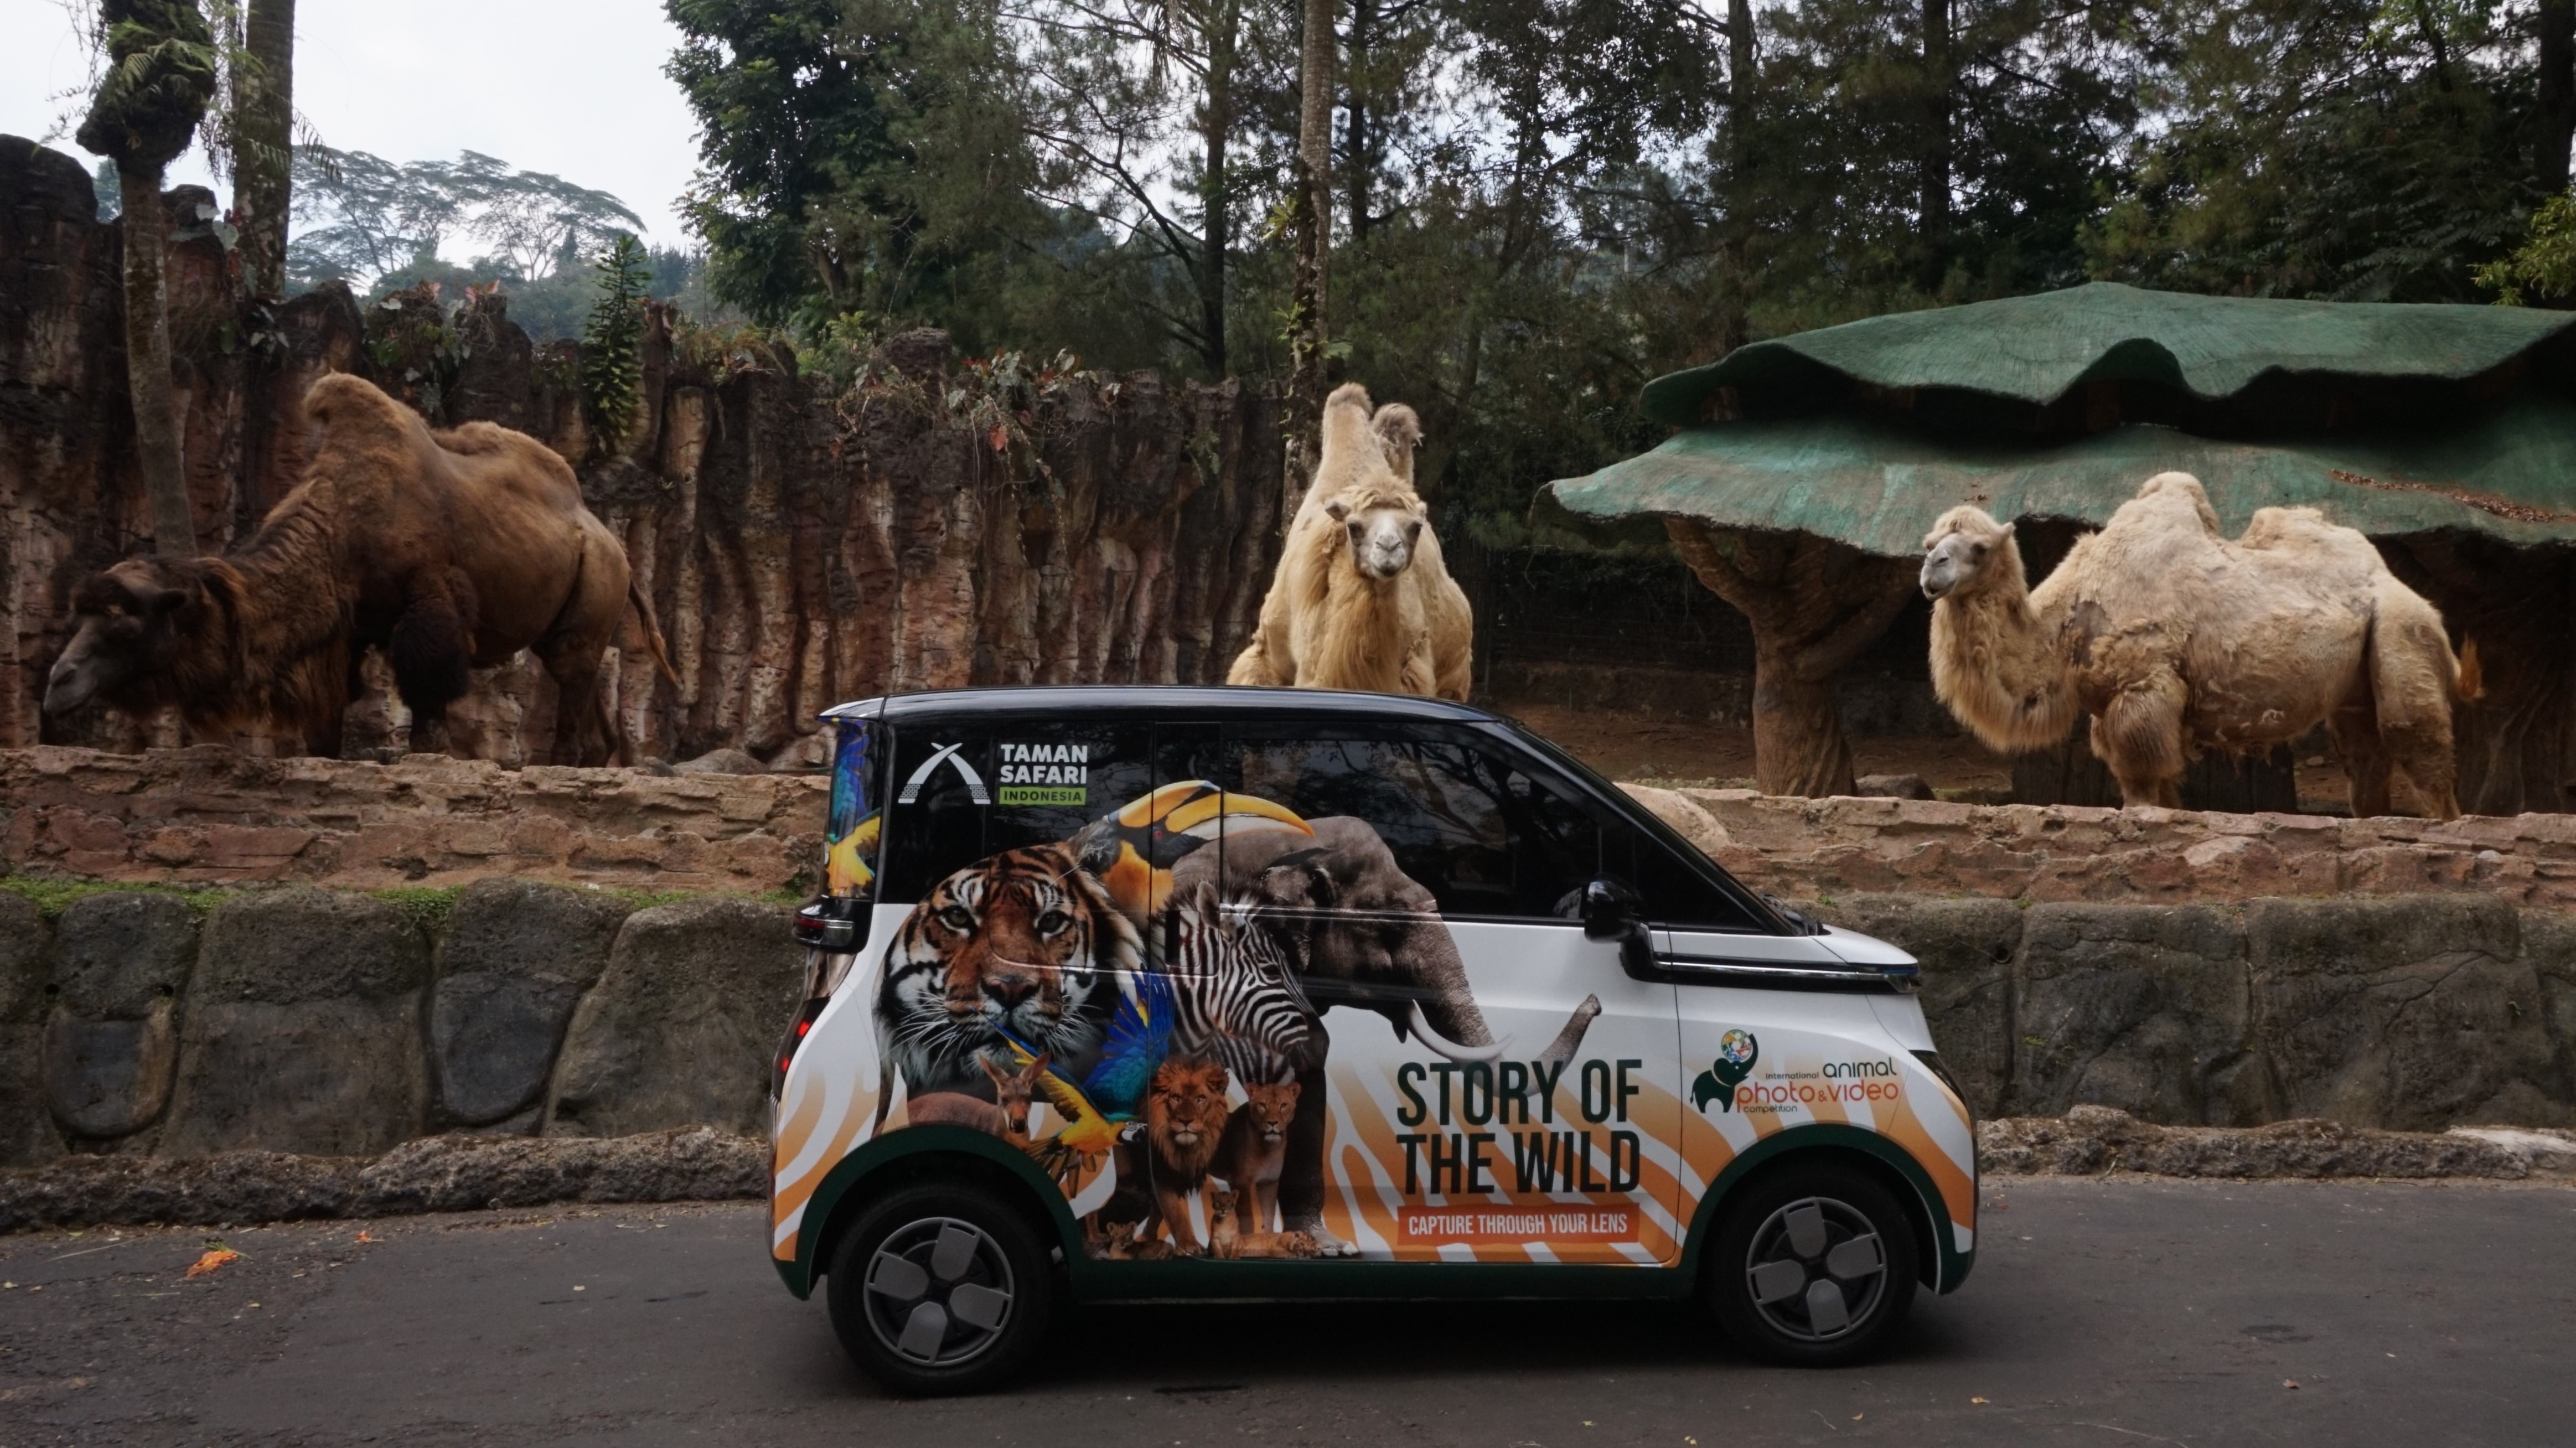 Image Taman Safari Indonesia Holds IAPVC 2023 with A Grand Prize of 1 Unit of Wuling Air ev